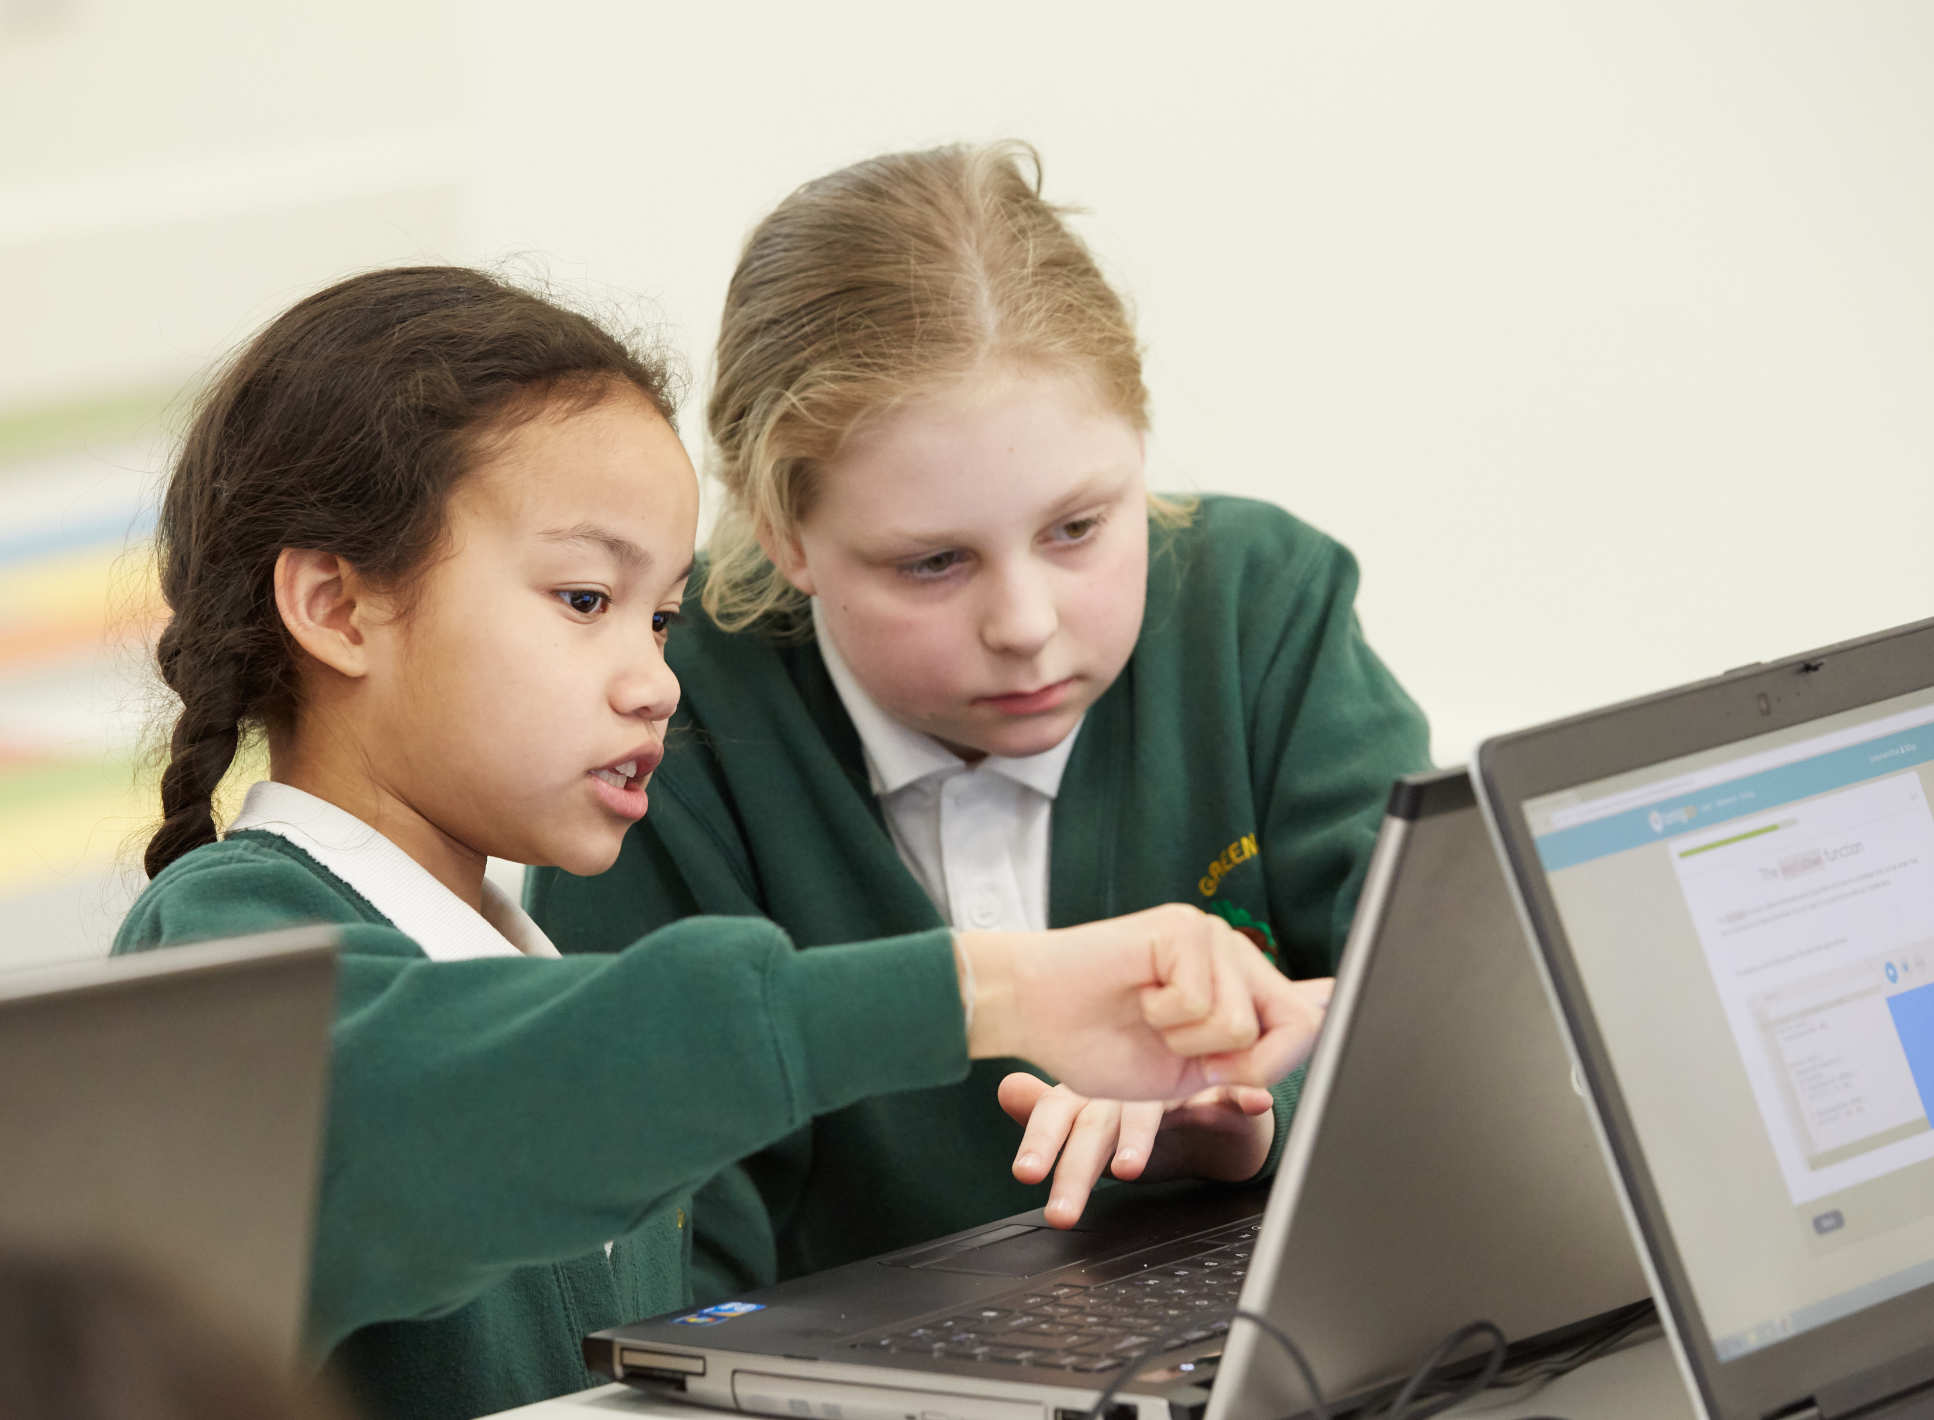 two girls focus on a laptop screen image 